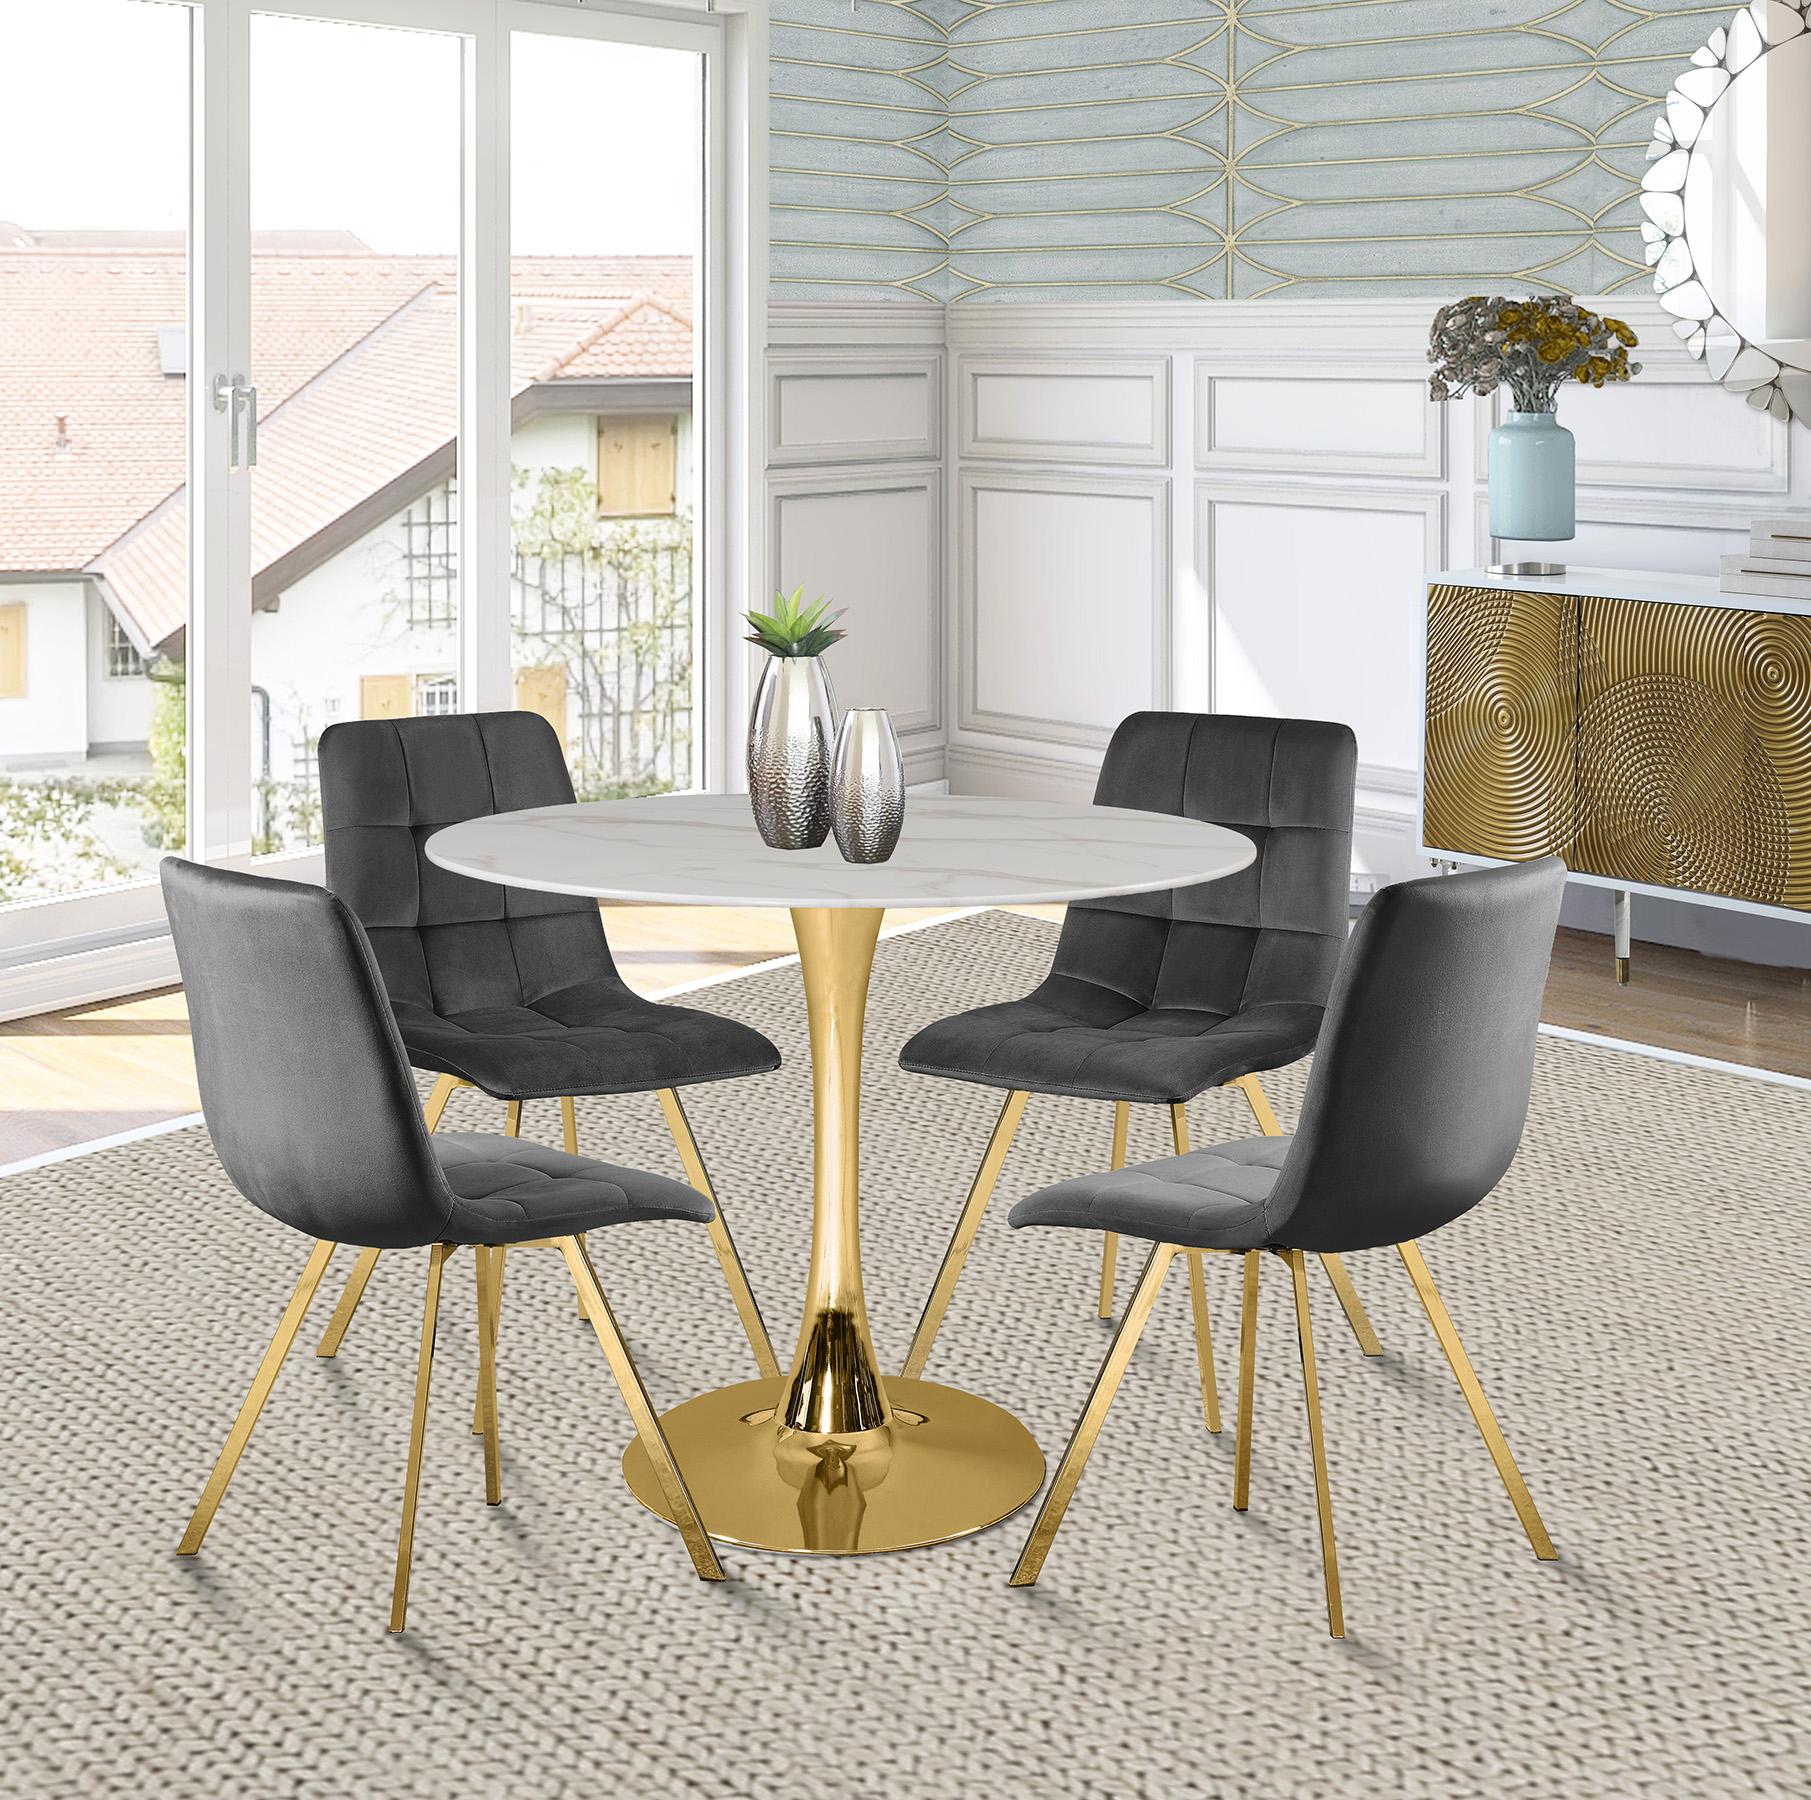 Contemporary, Modern Dining Table Set TULIP & ANNIE 971-T 971-T-Set-5 in White, Gray, Gold Fabric